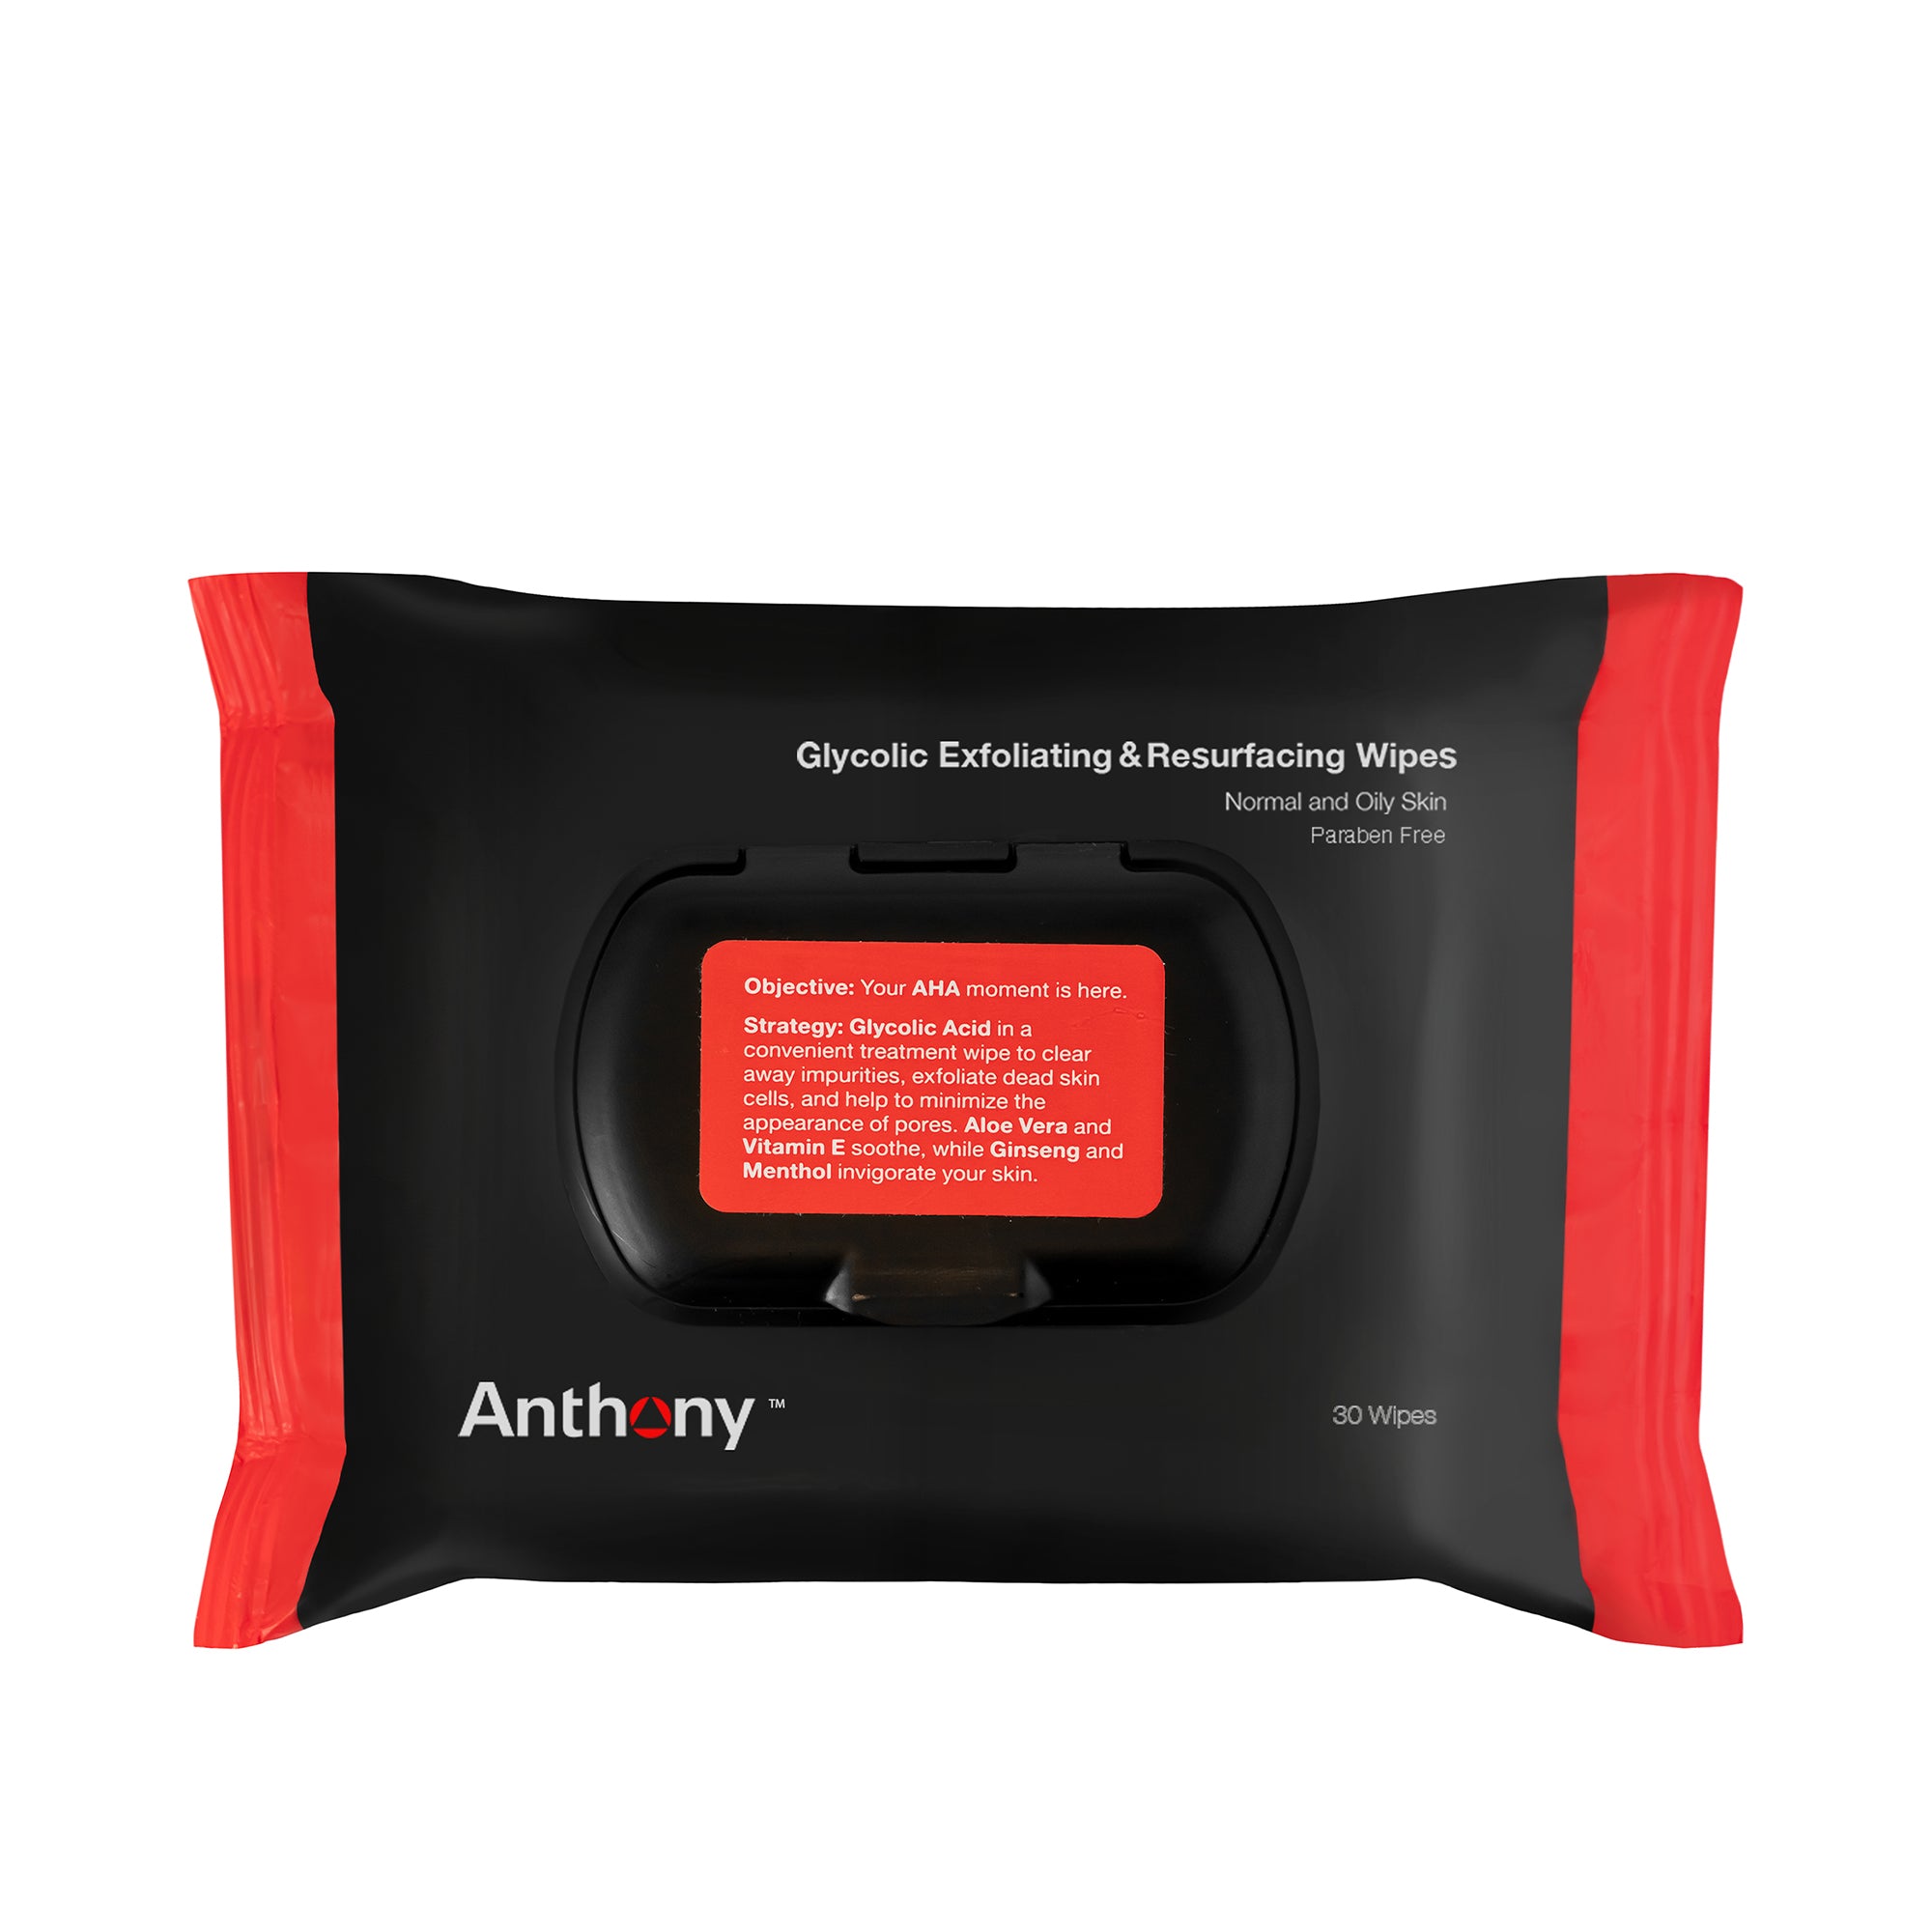 Glycolic Exfoliating and Resurfacing Wipes